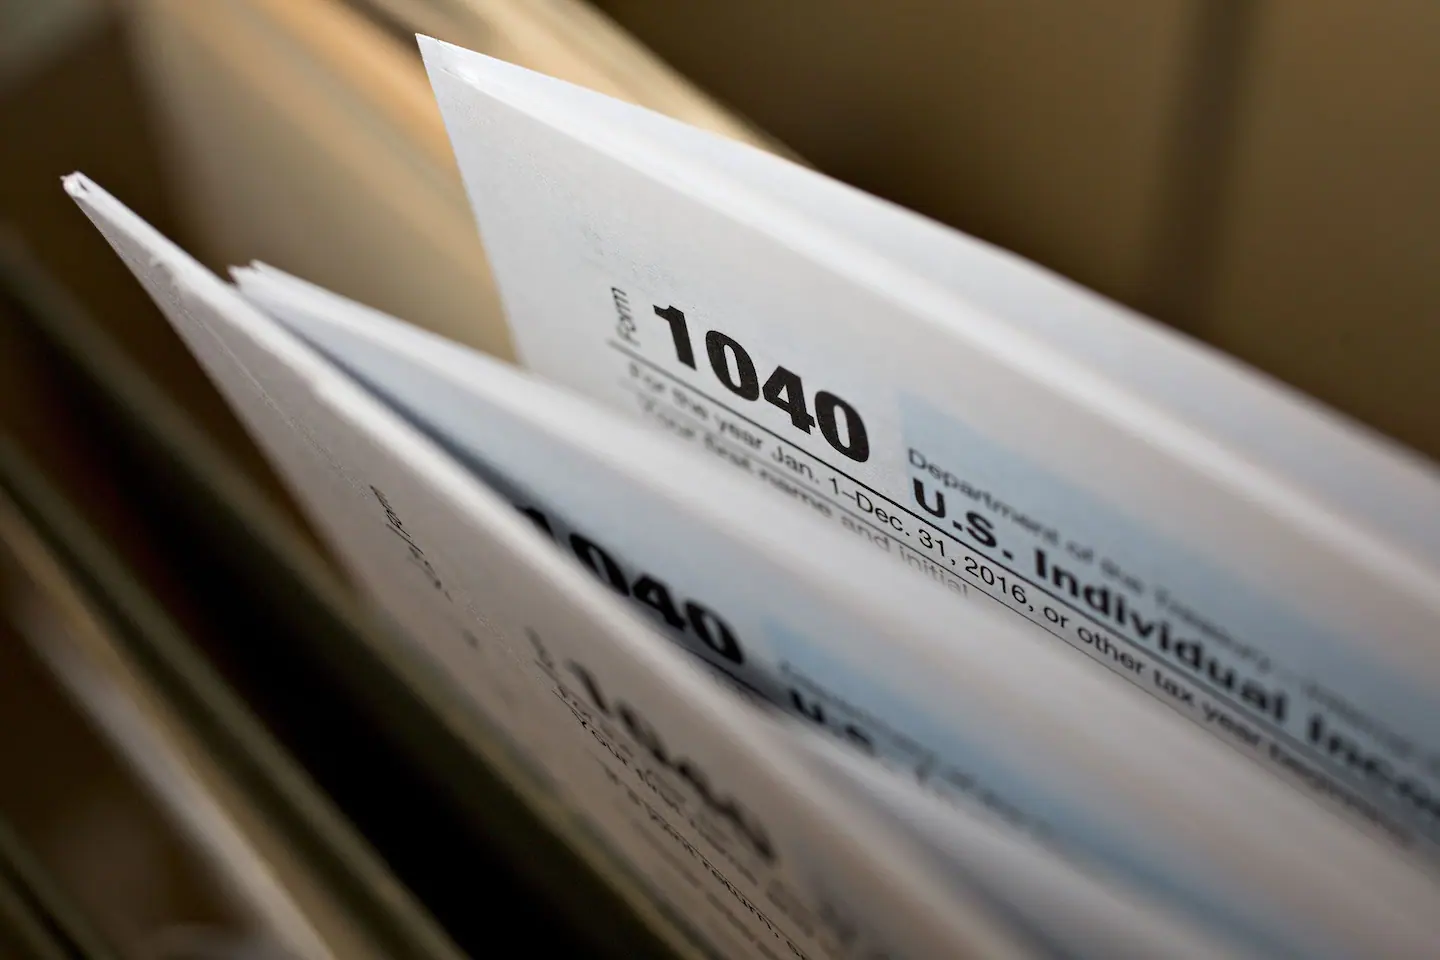 IRS delays filing deadline to mid-May, as IRS grapples with a backlog of 24 million unprocessed tax returns